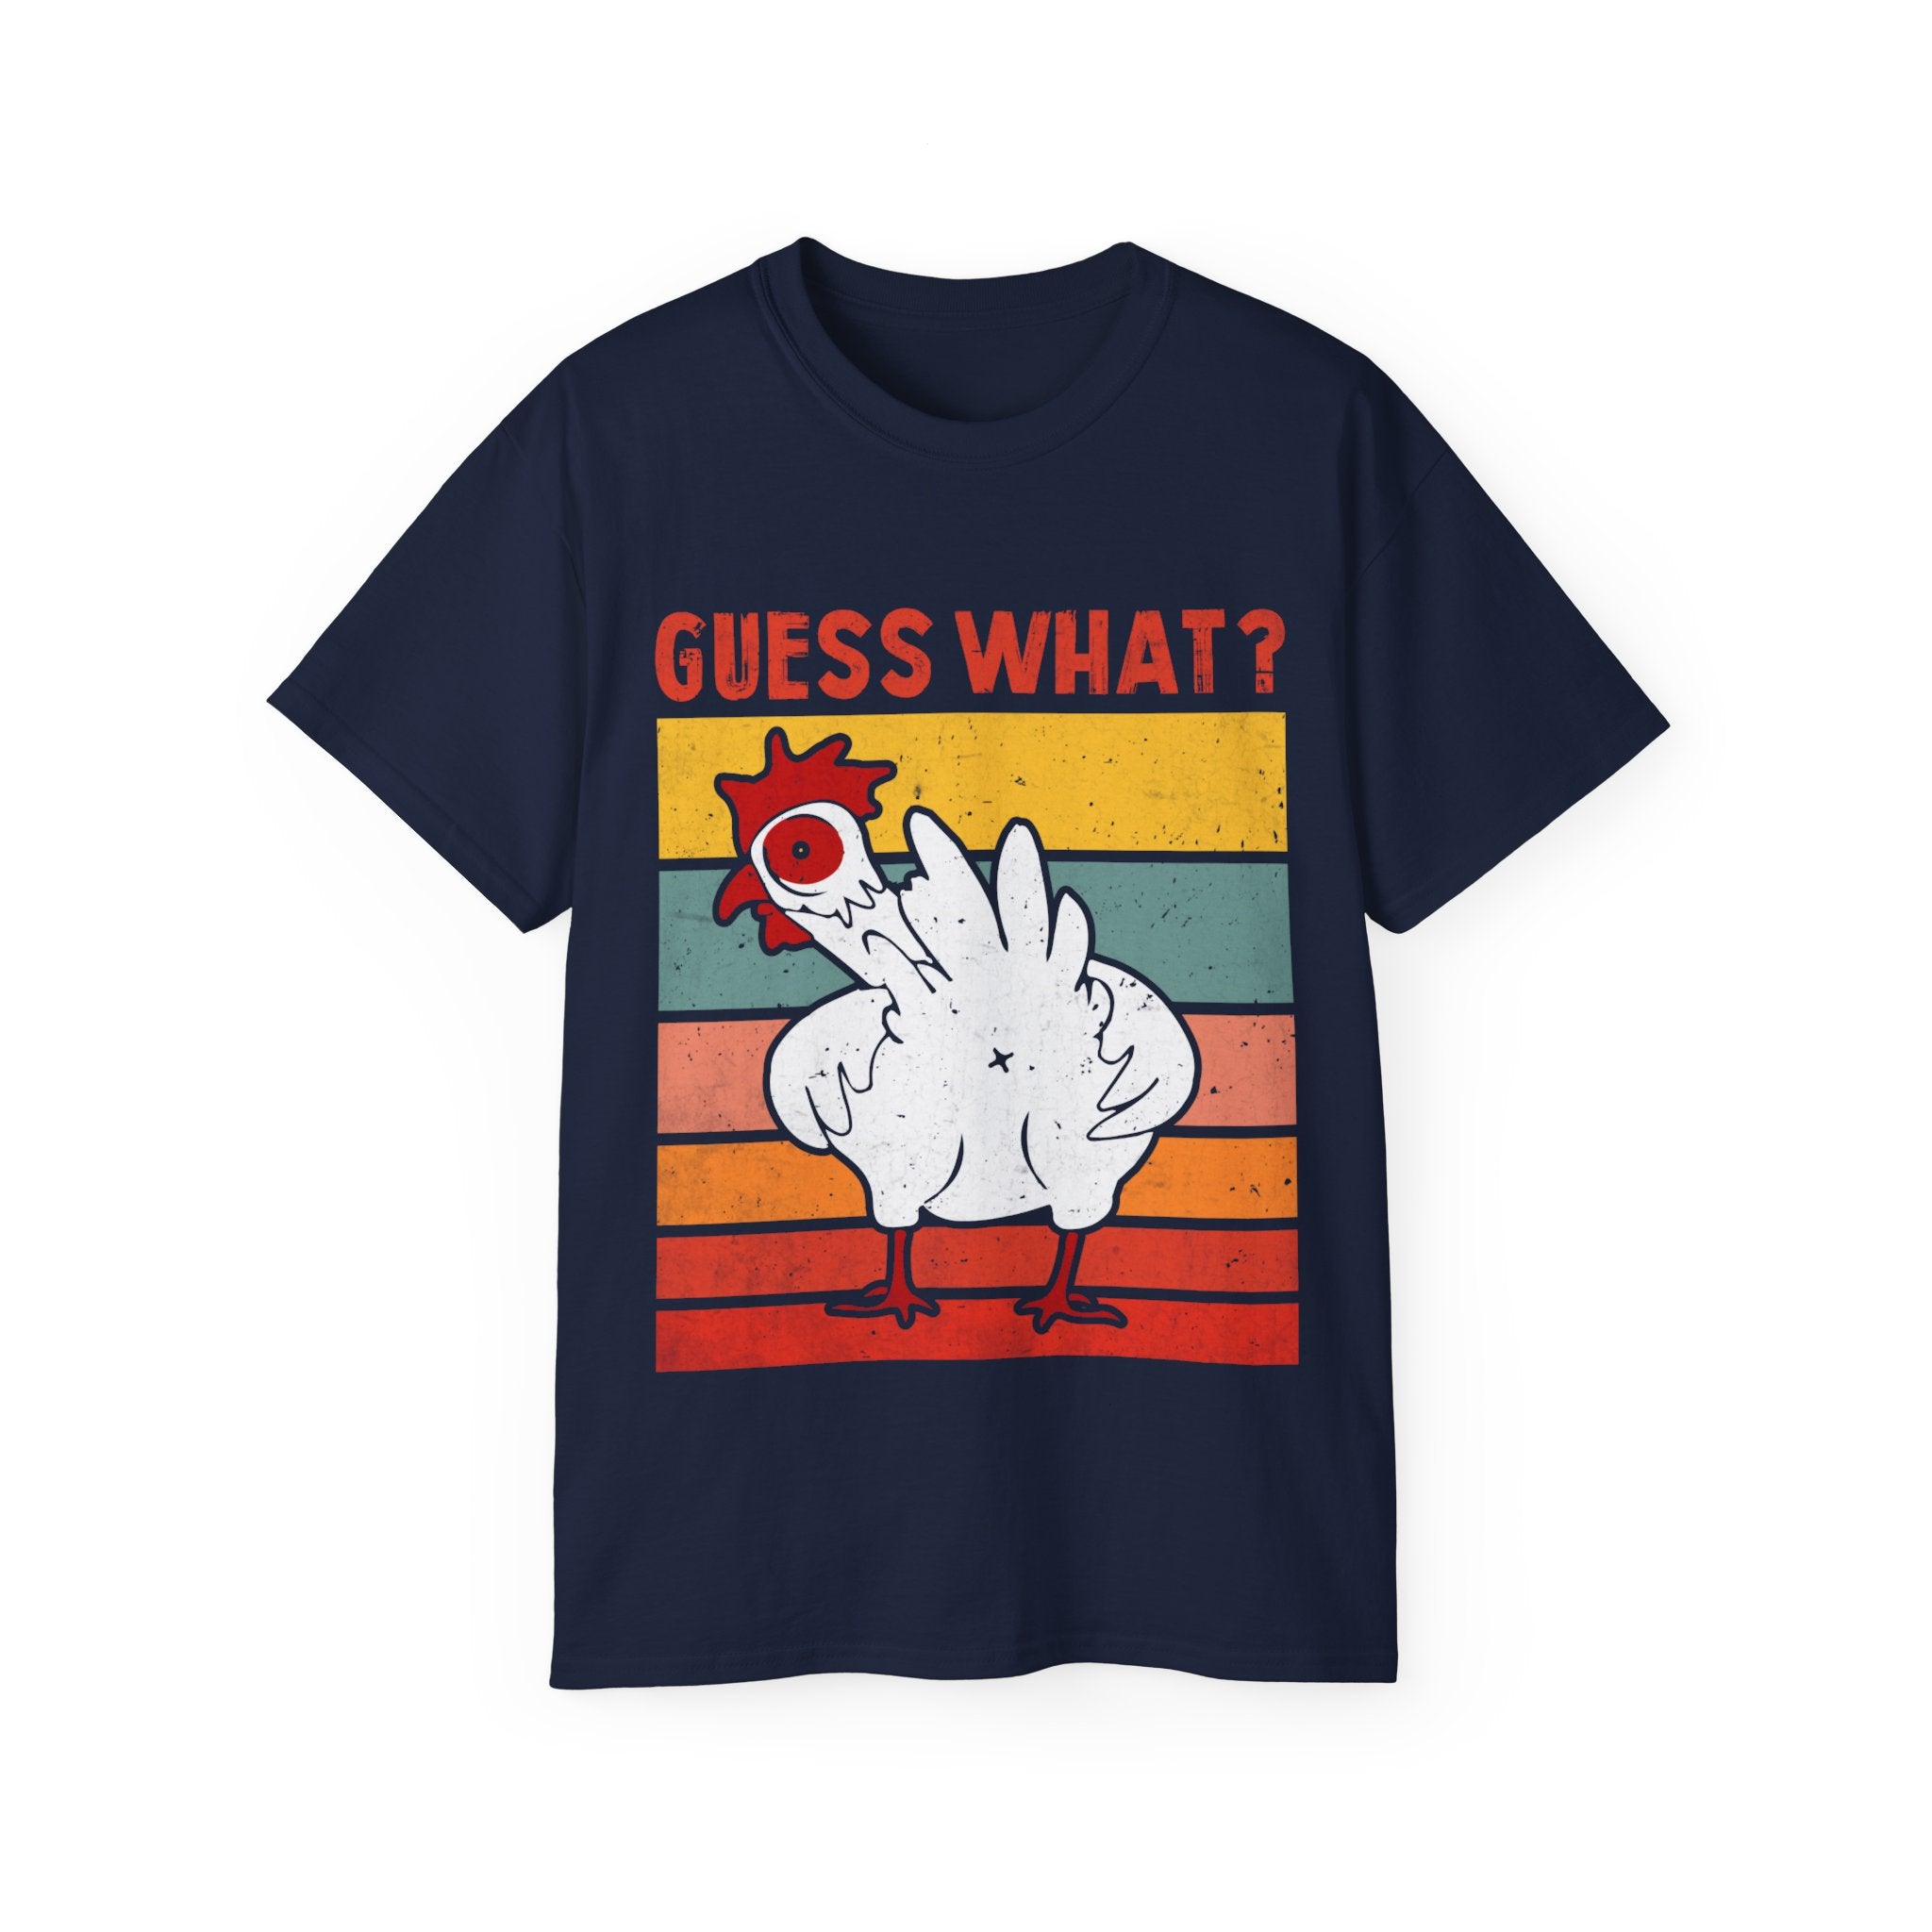 Guess What Chicken Butt tee, Funny unisex cotton tee, Classic humor t-shirt, Ultra cotton casual shirt, Playful graphic tee, Comfortable humor shirt, Unisex joke t-shirt, Casual wear funny tee, High-quality cotton shirt, Iconic joke tee, Breathable cotton t-shirt, Durable graphic shirt, Laughter-inducing cotton tee, Family-friendly humor shirt, Everyday comfort tee